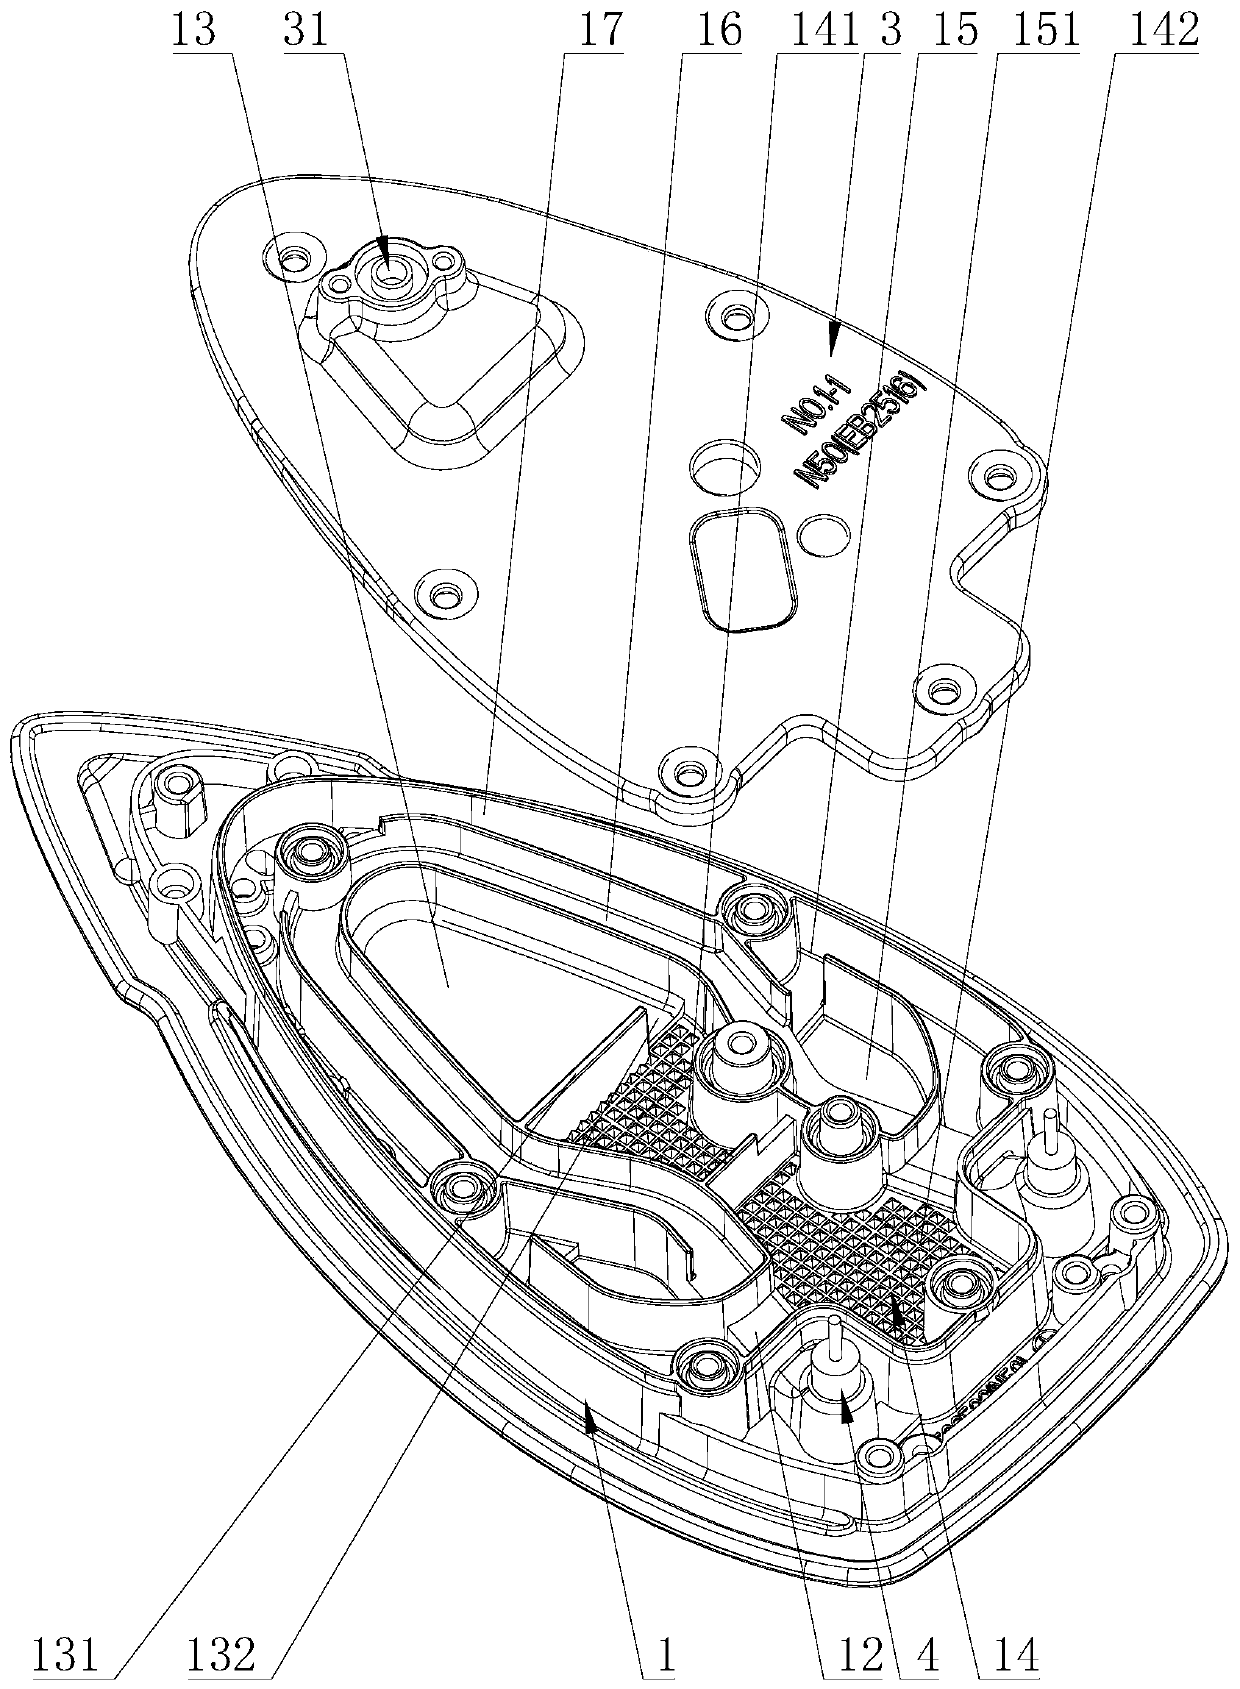 Base plate assembly of steam iron